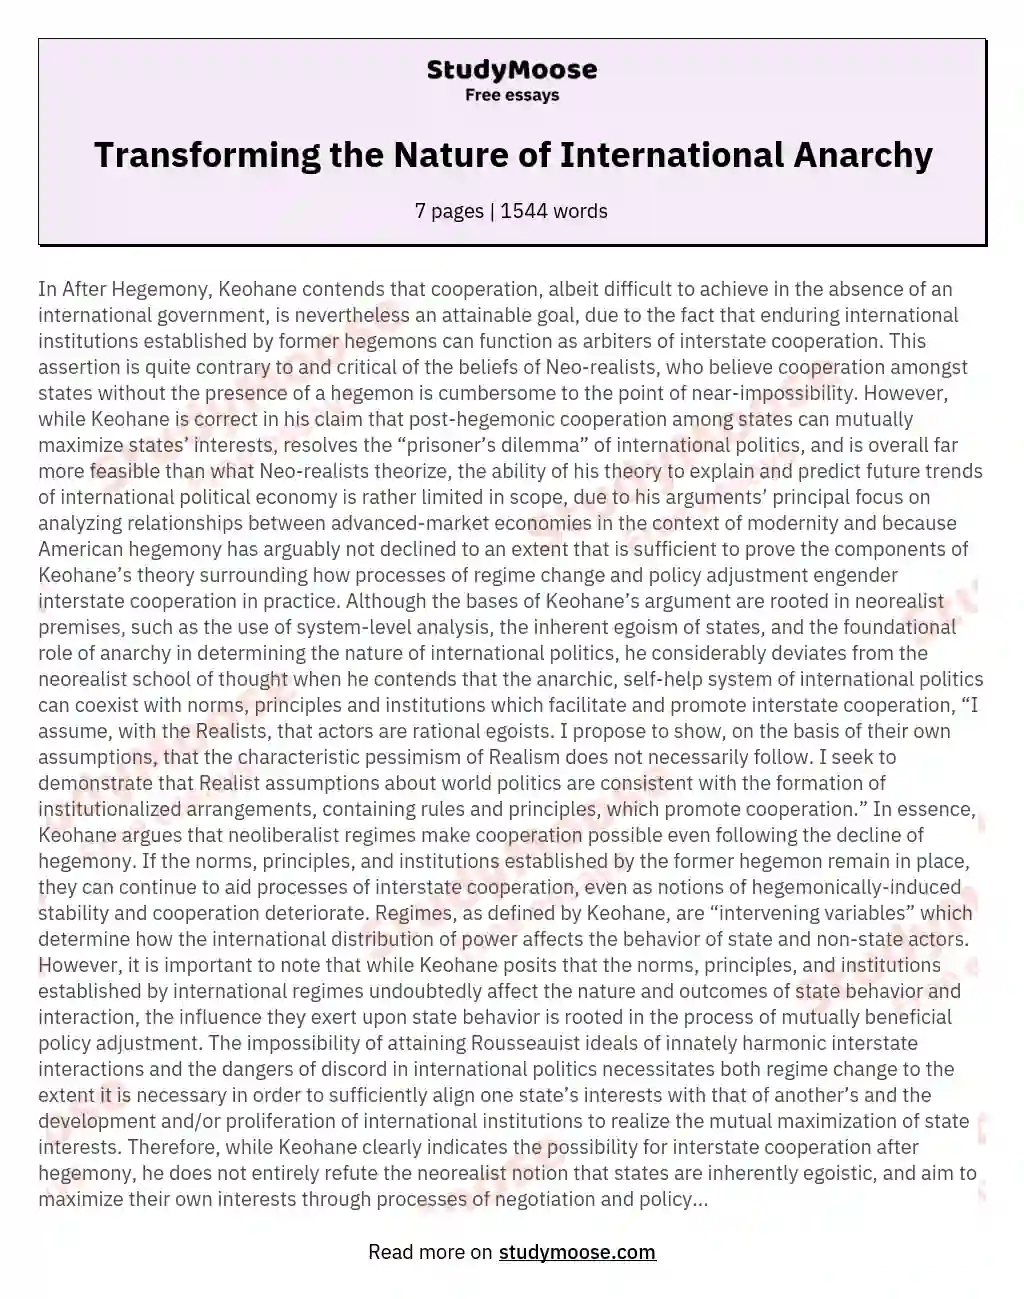 Transforming the Nature of International Anarchy essay